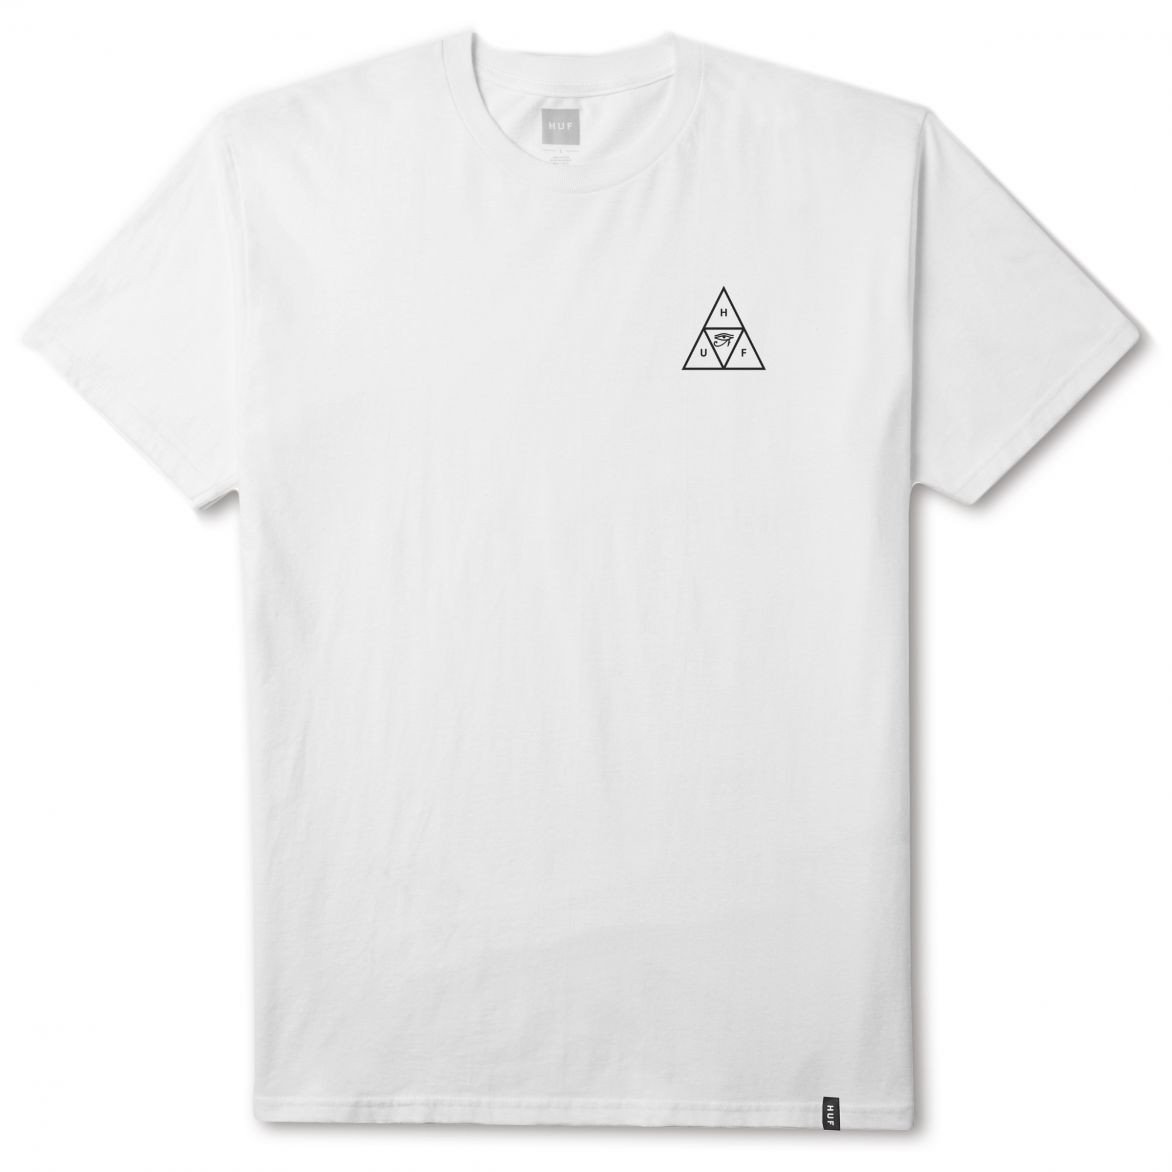 TS00048 HUF SUMRA TRIPLE TRIANGLE TEE \\ WHITE-The Collateral